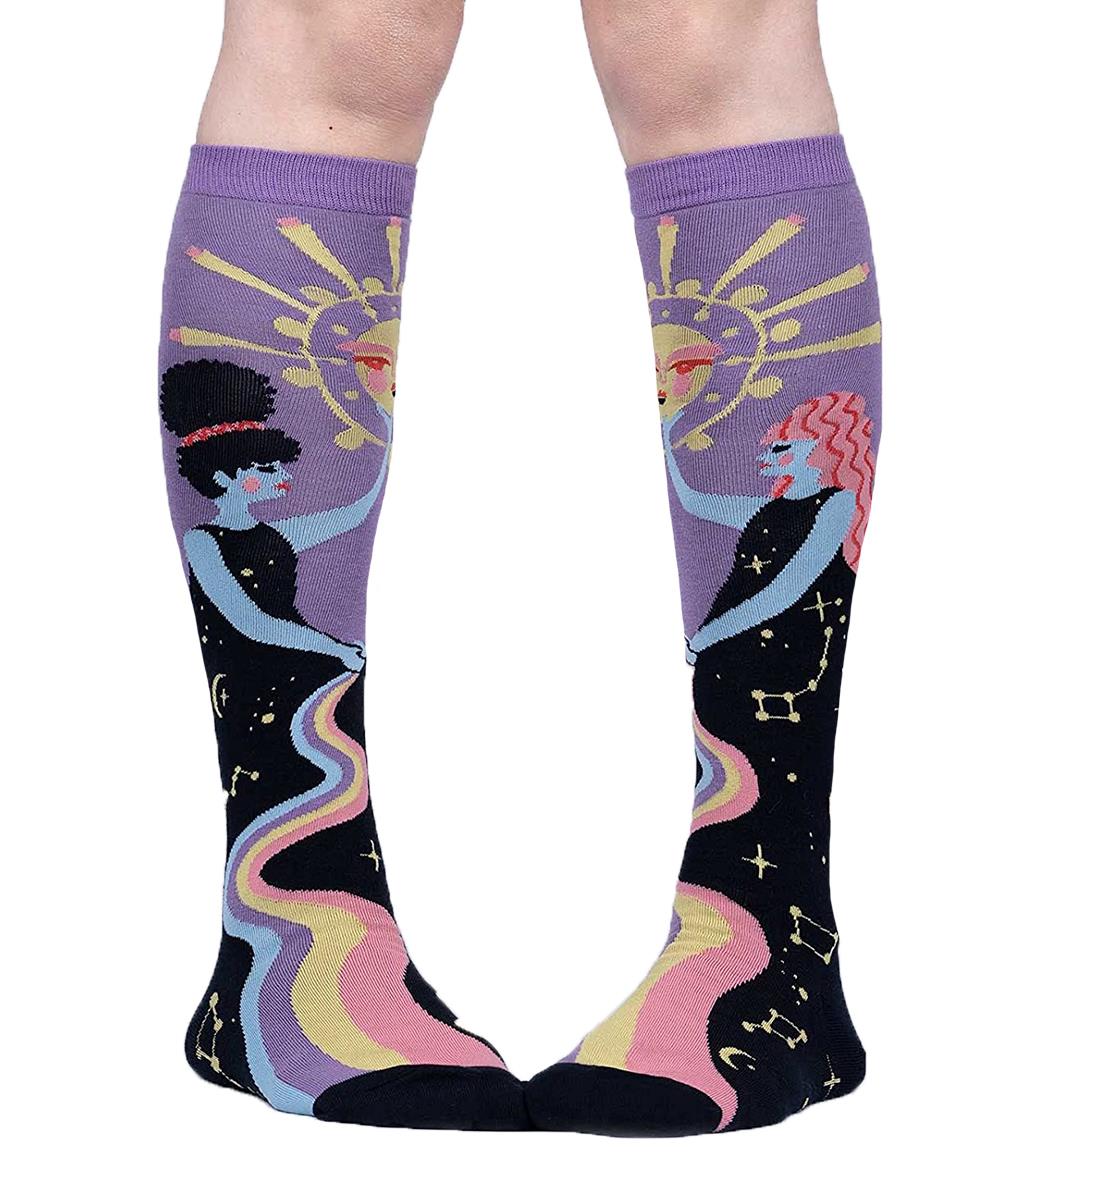 SOCK it to me Unisex Knee High Socks (F0568),Cosmic Connection - Cosmic Connection,One Size